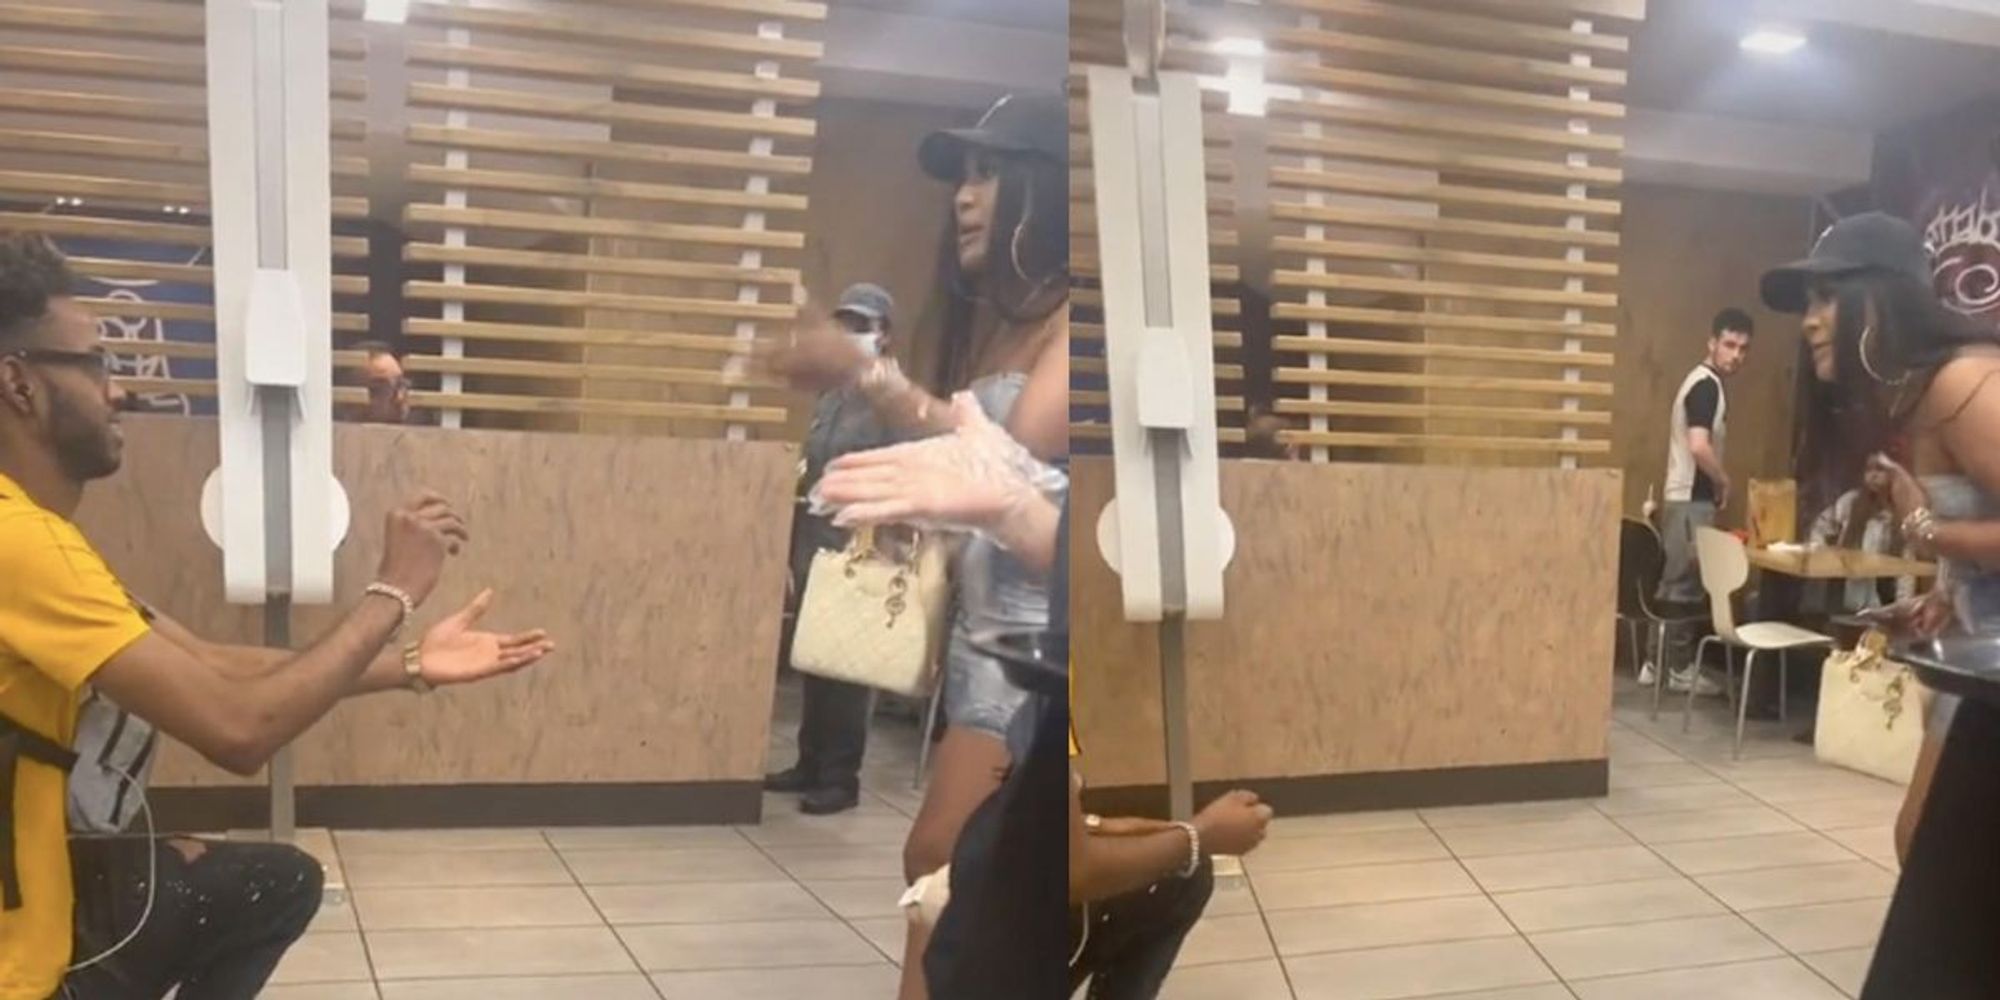 Man gets furiously rejected after proposing to girlfriend in McDonald’s: “Is that how much I mean to you?”